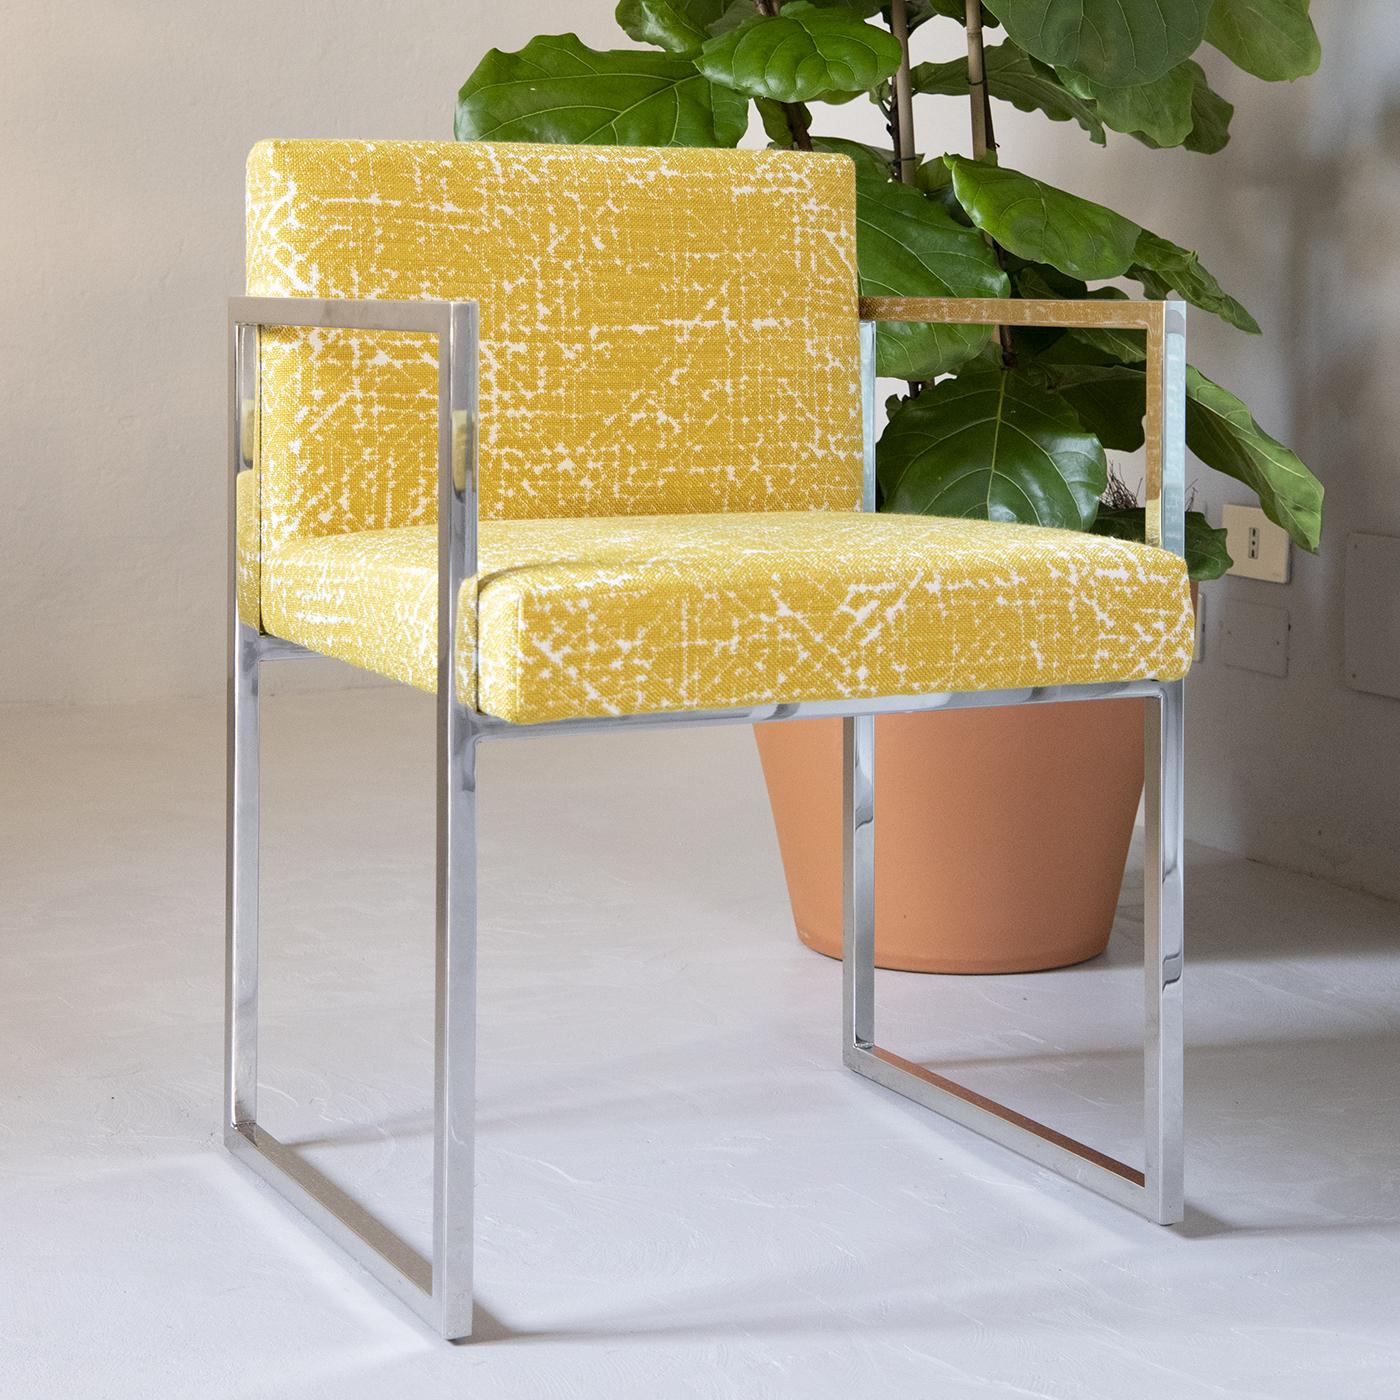 Designed by Gianna Farina and Marco Gorini, the stylish Paris Outdoor Chair is made with a polished stainless steel structure with seat and back featuring outdoor padding and upholstered in high-performance Rubelli fabric in yellow. Ideal for the